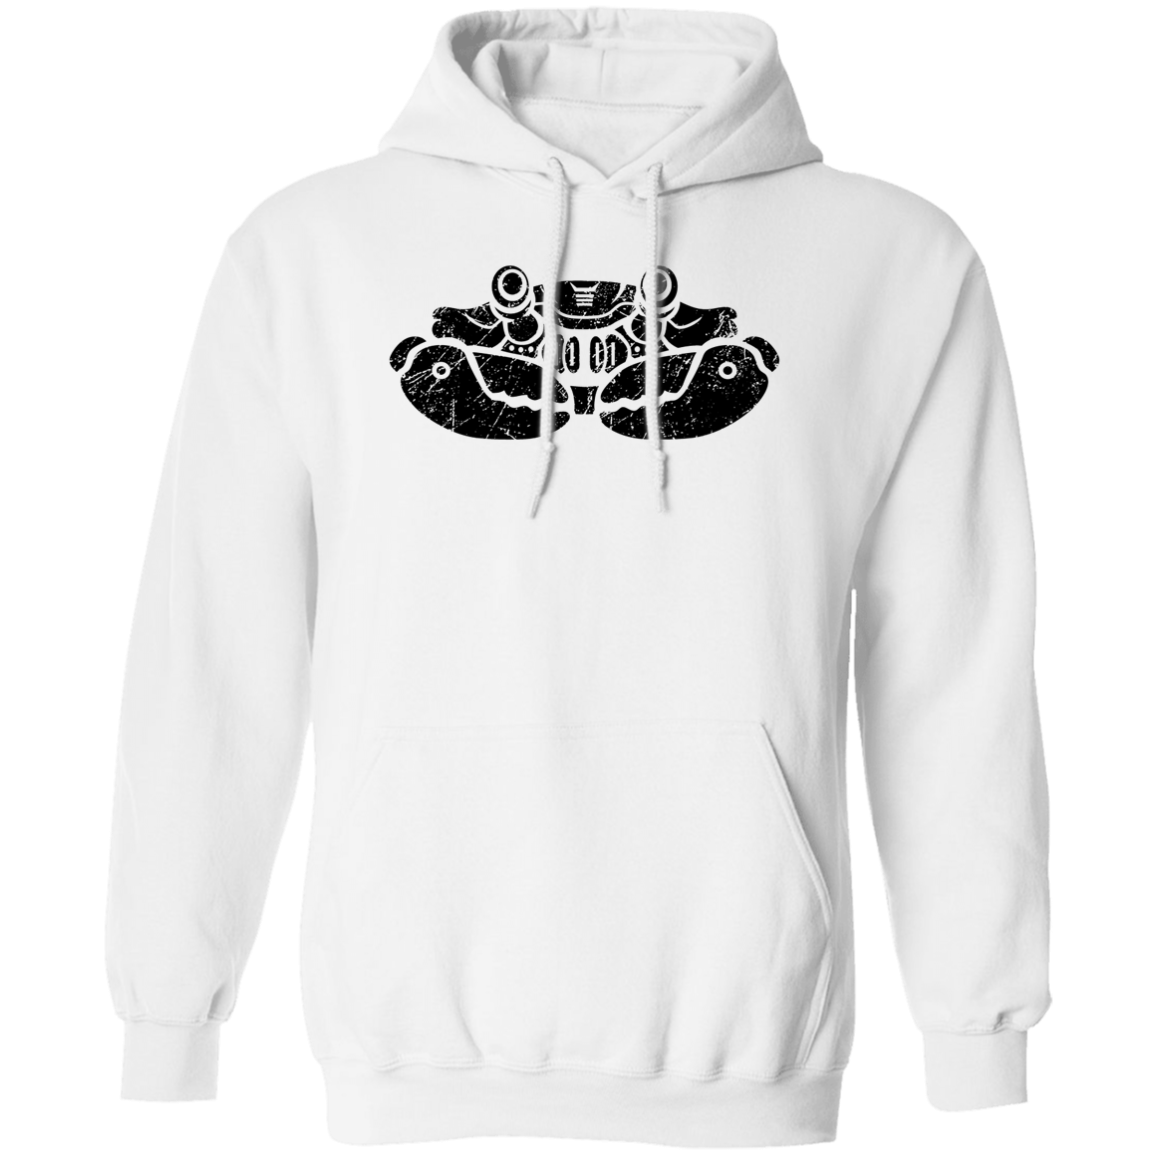 Black Distressed Emblem Hoodies for Adults (Crab/Clamps)